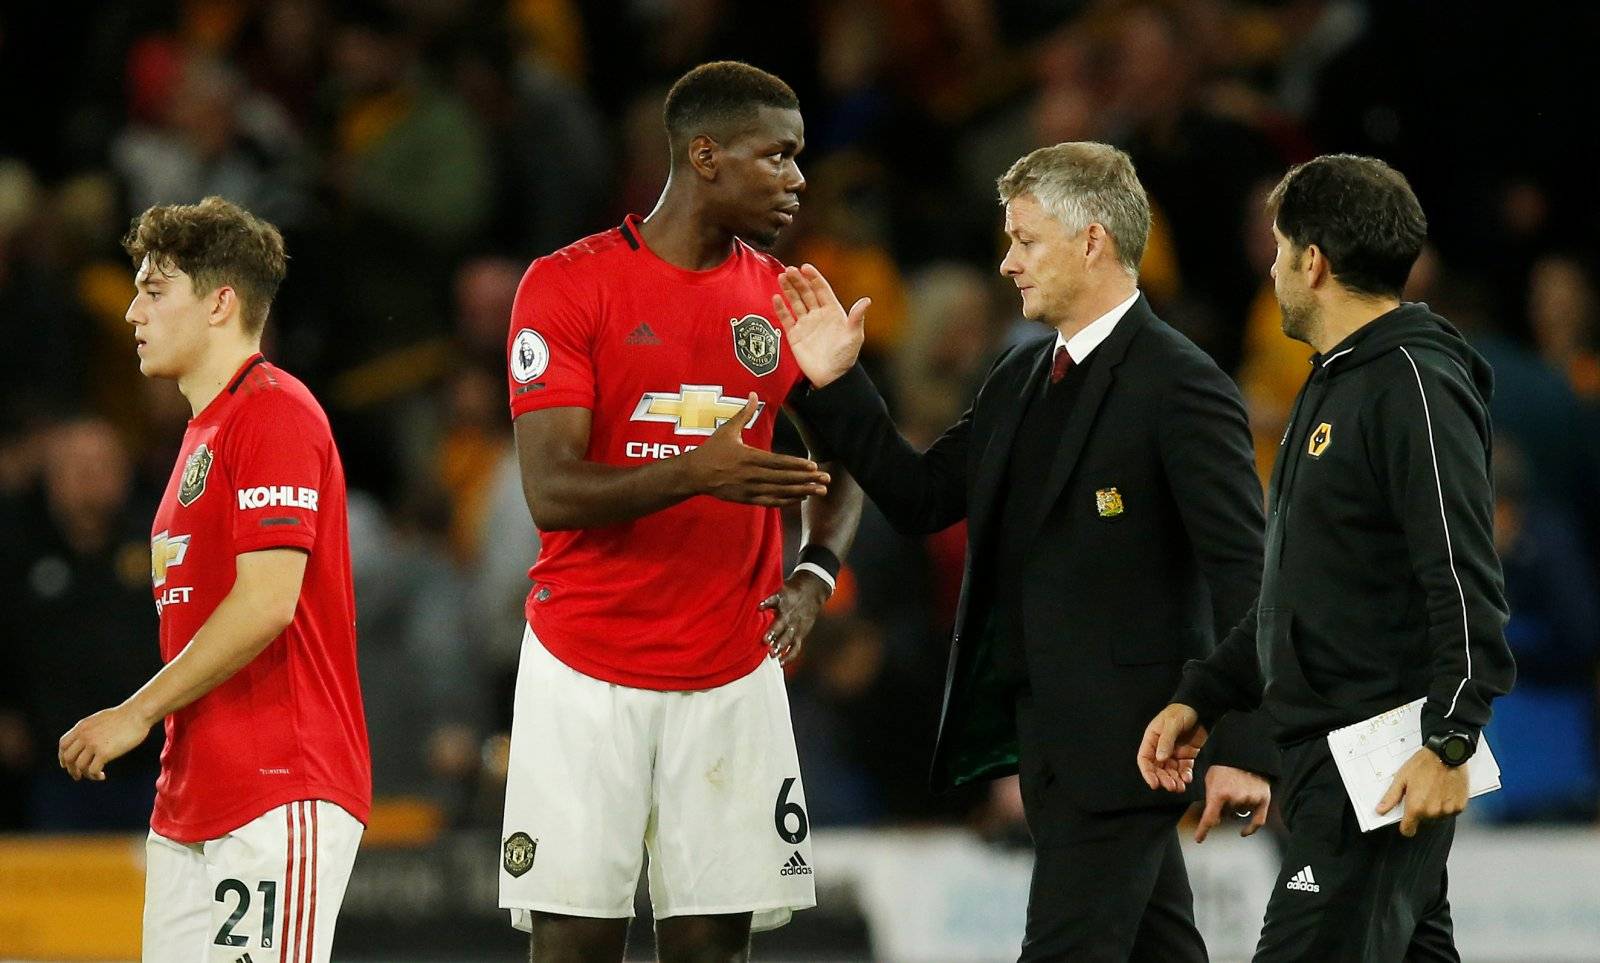 Manchester United: Forget Sancho - Red Devils must persuade Paul Pogba to sign new deal [Opinion] - Manchester United